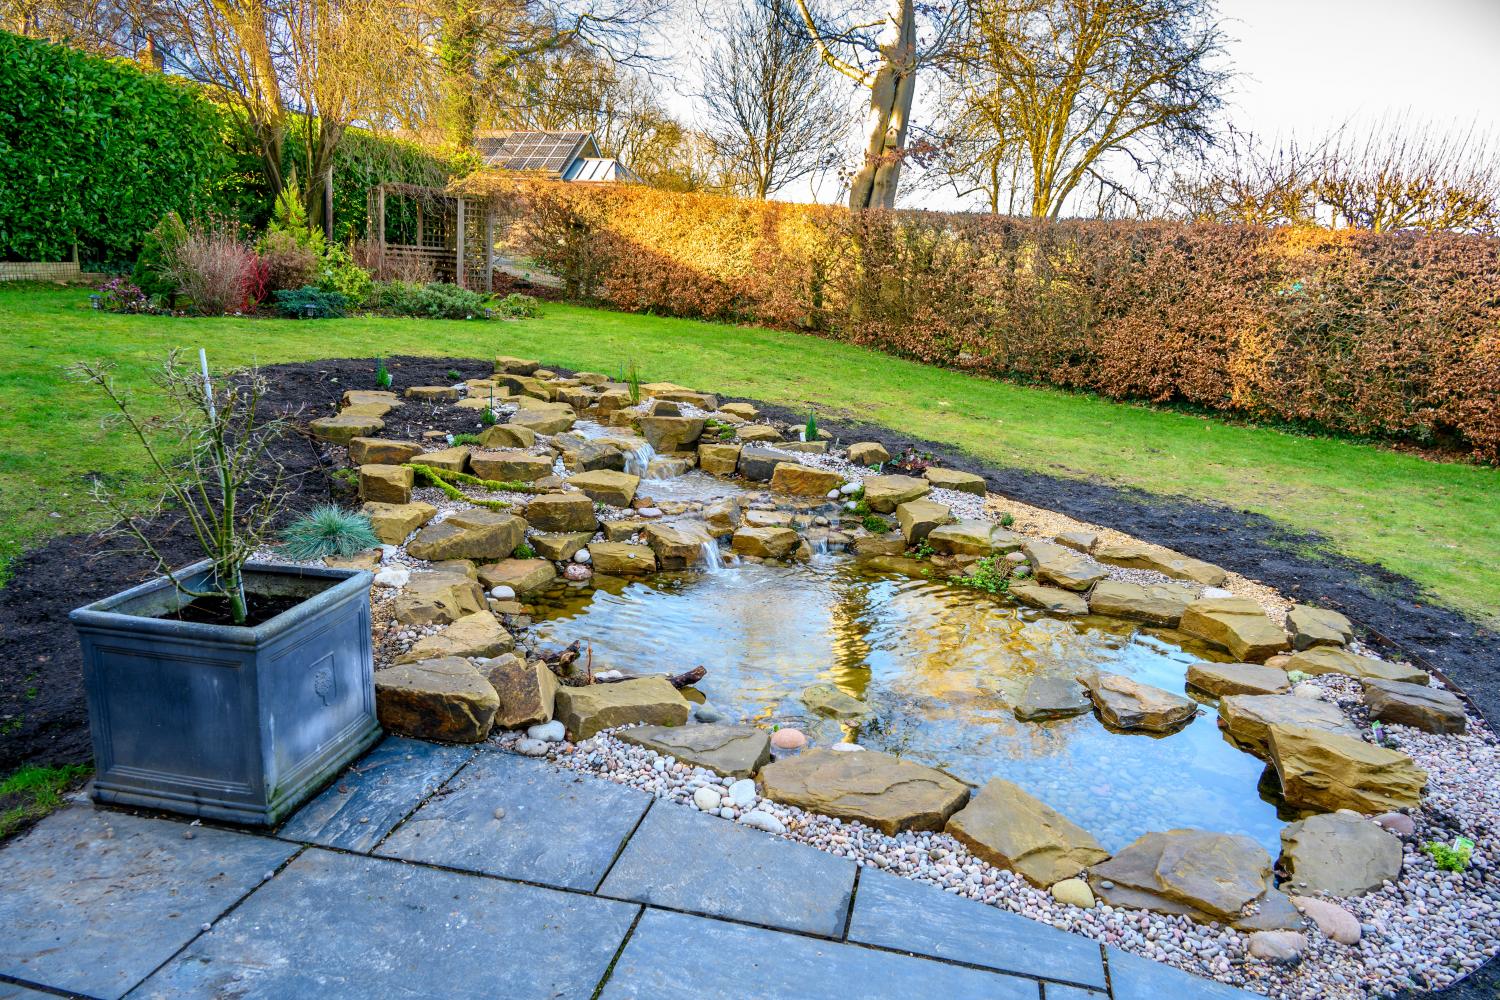 Pond using Yorkstone and Scottish pebbles. Once plant growth is in full swing, the rocky appearance will be considerably softened. Plenty of rocks required to retain the lawn and soil to the rear.  - Landscaping and Water Features -  Creative Cascades